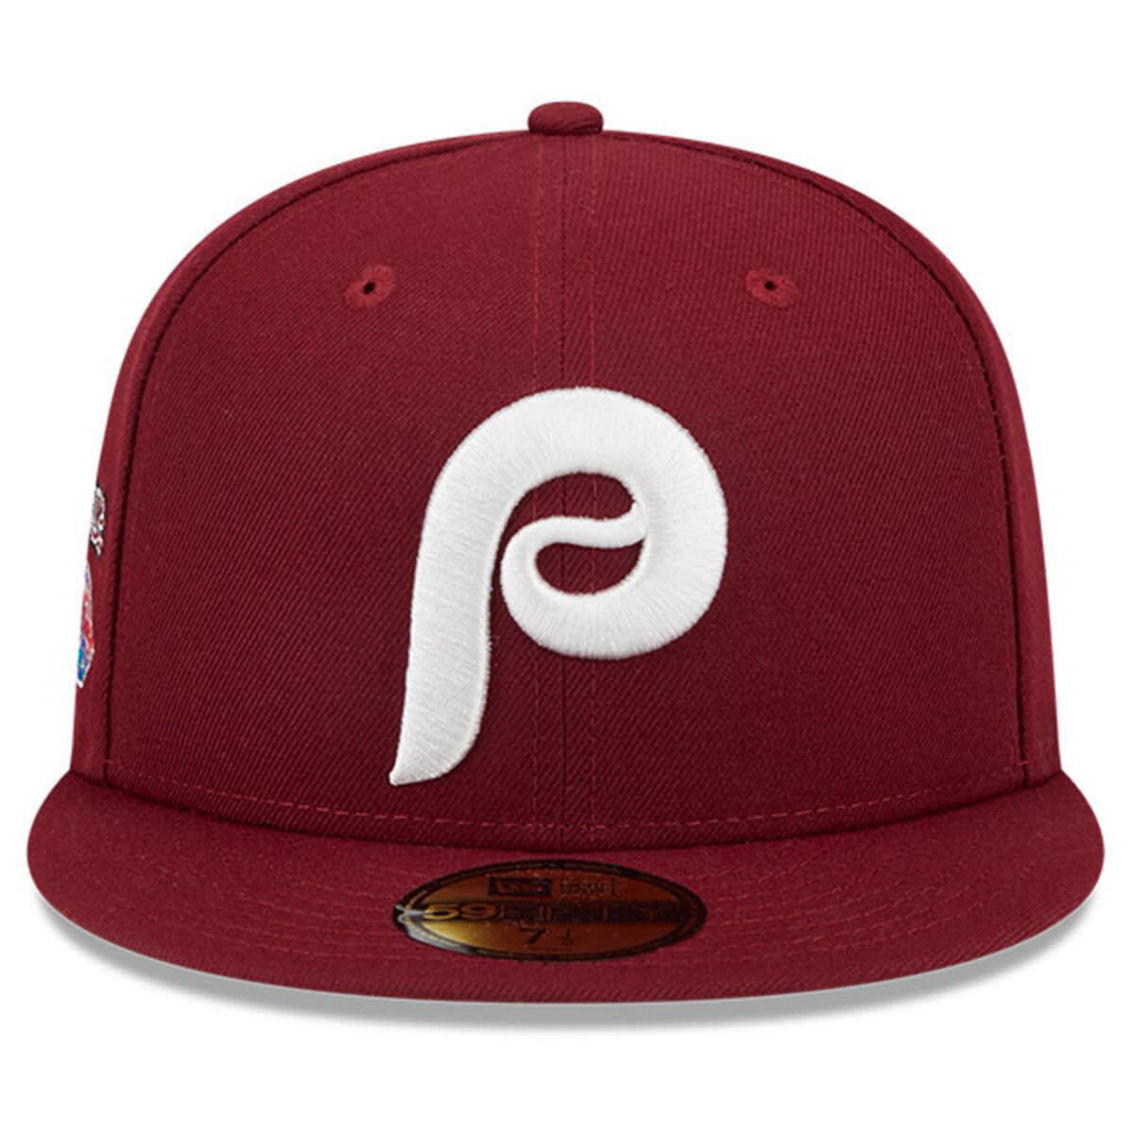 New Era Men's Red Philadelphia Phillies Big League Chew Team 59FIFTY Fitted Hat - Image 3 of 4